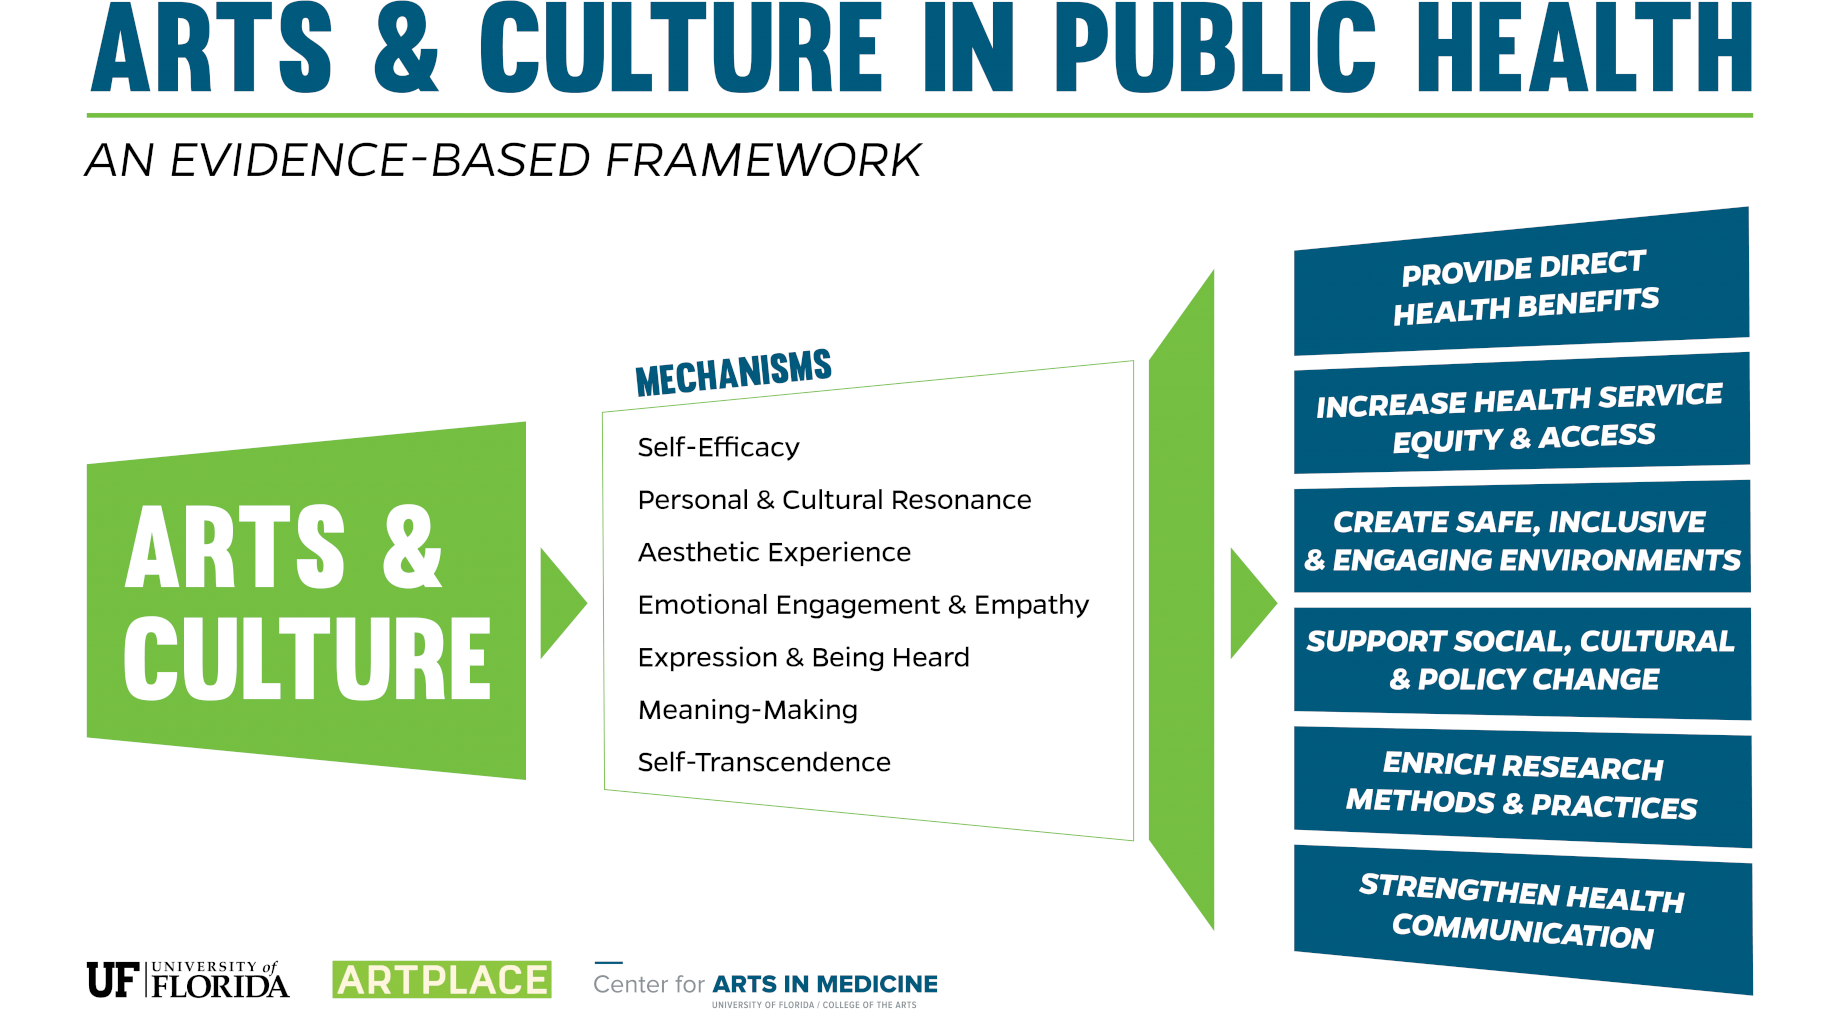 Arts and culture in public health: an evidence based framework. Arts and culture mechanisms: self-efficacy, personal & cultural resonance, aesthetic experience, emotional engagement & empathy, expression & being heard, meaning-making, and self-transcendence. Outcomes: provide direct health benefits, increase health service equity & access, create safe, inclusive & engaging environments, support social, cultural & policy change, enrich research methods & practices, strengthen health communication.